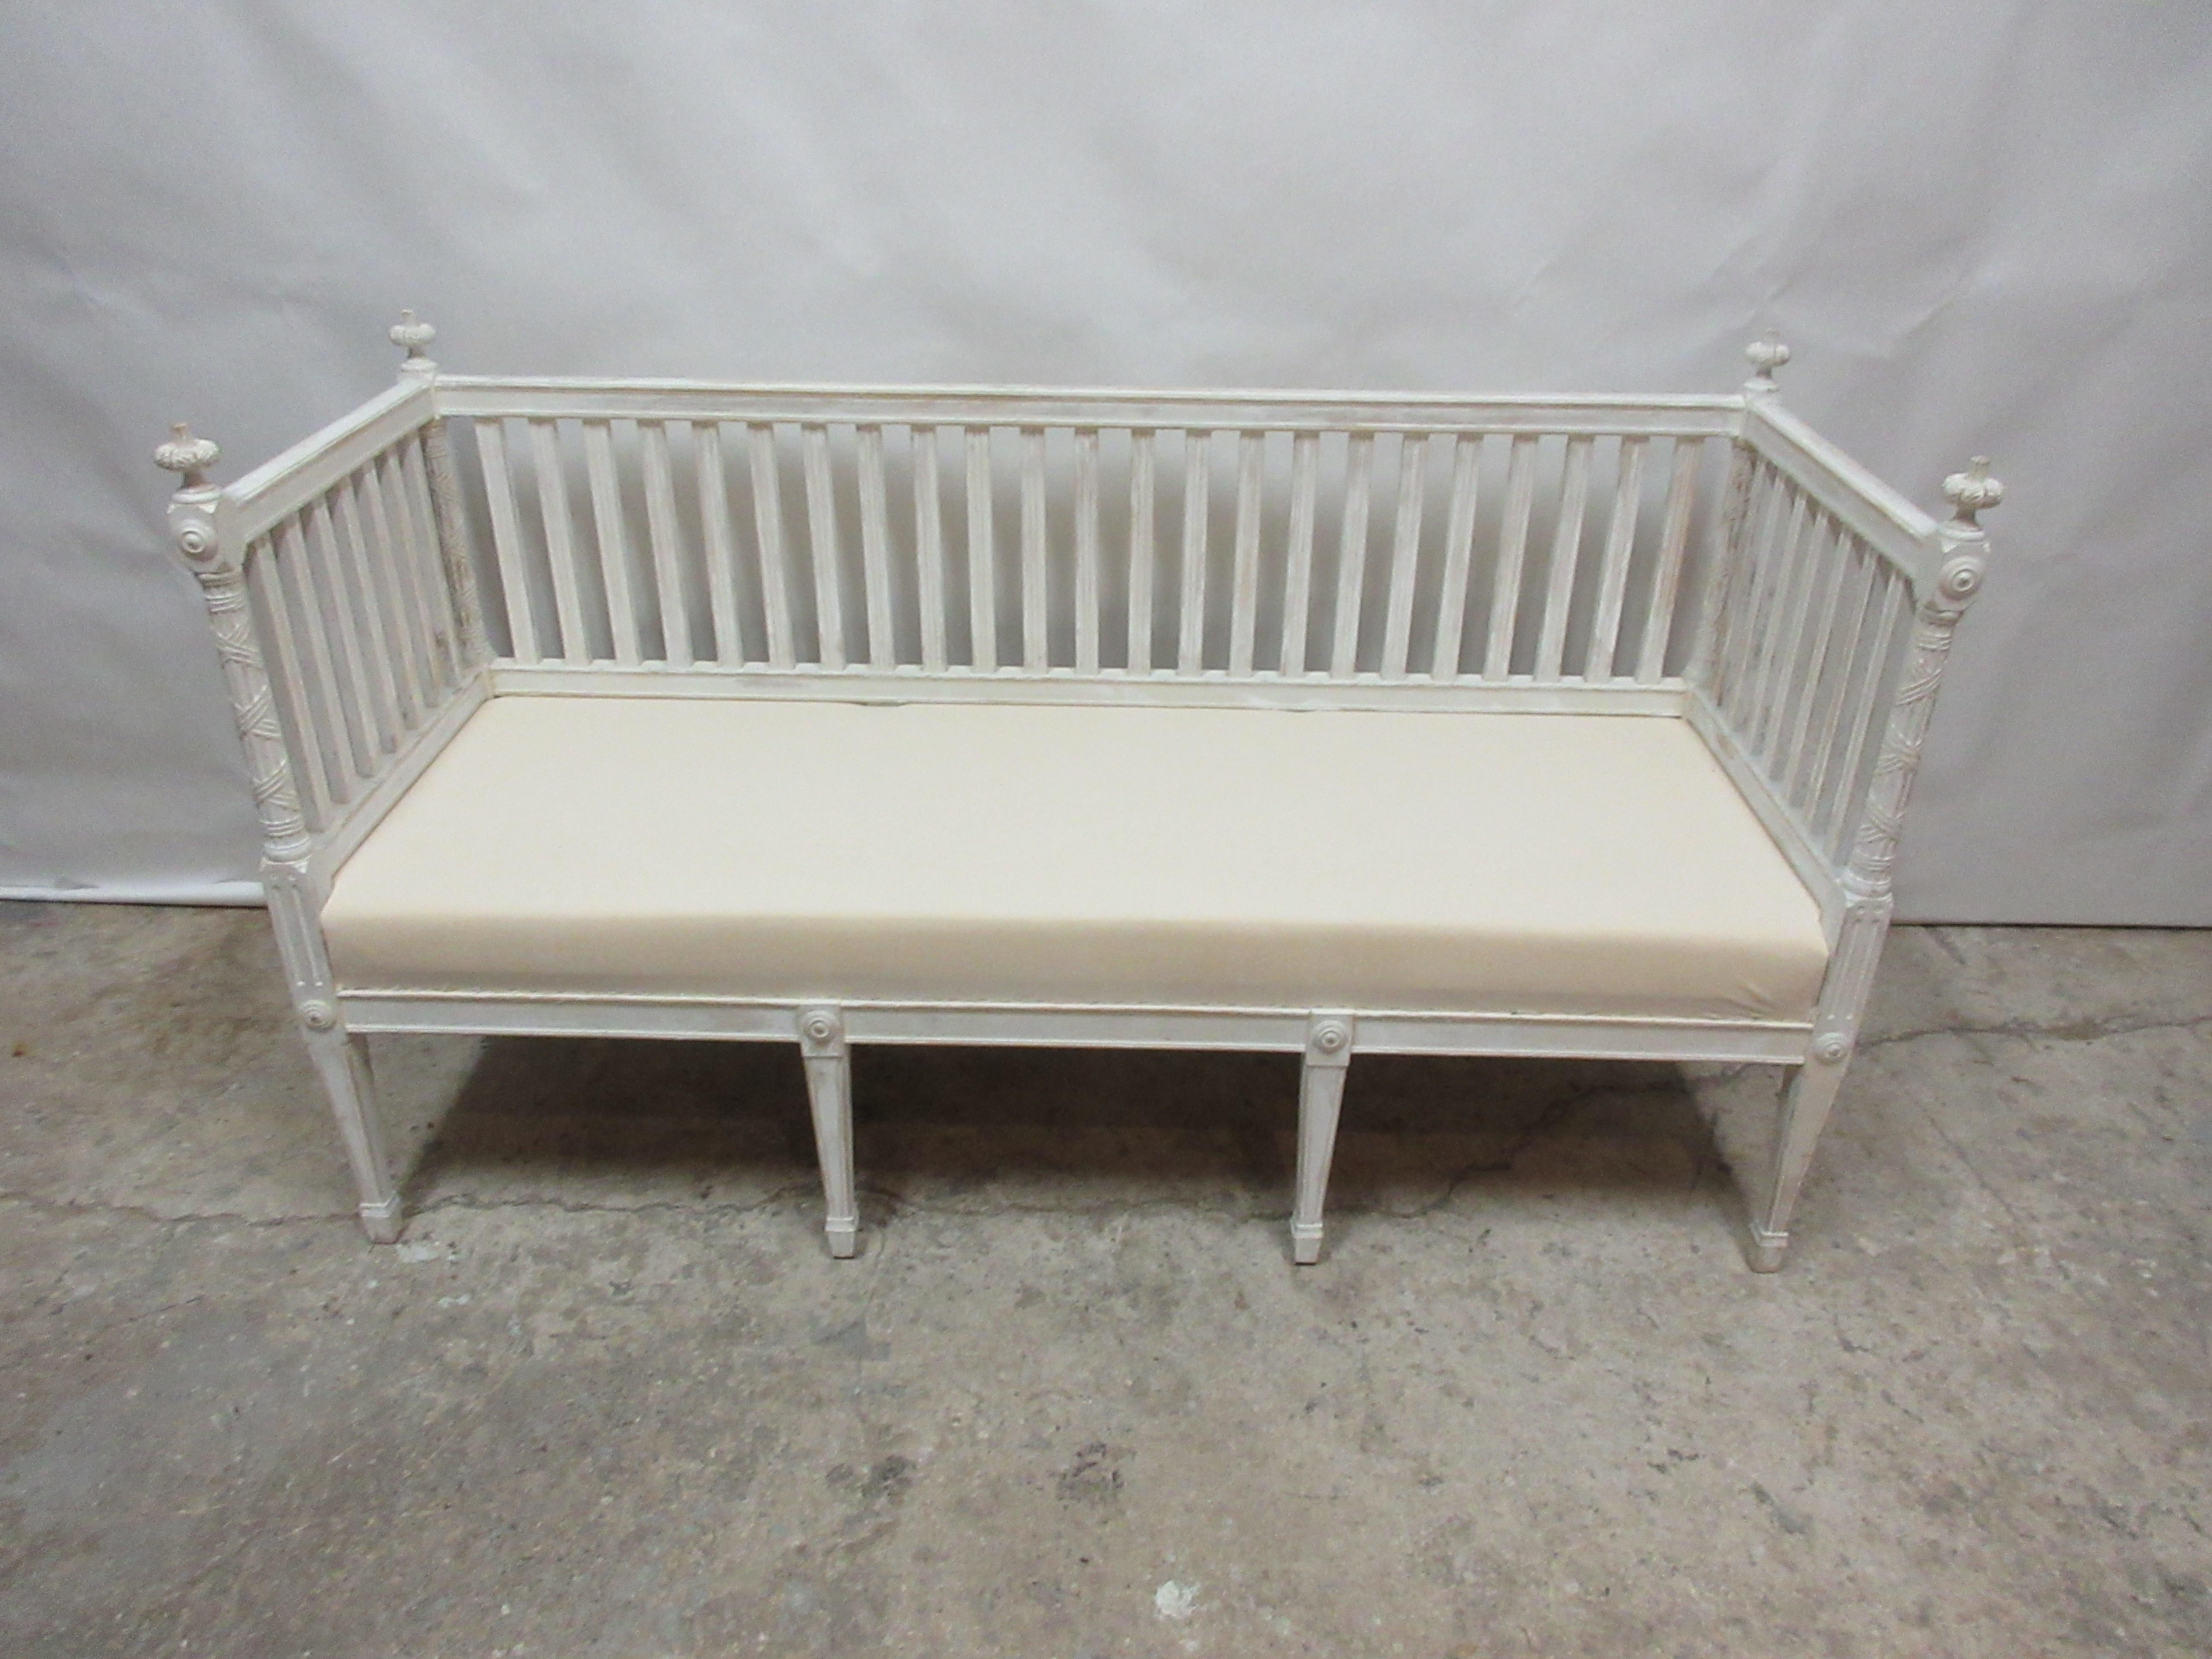 This is a 100% original painted Swedish Gustavian sofa. the seating has been restored and covered in Muslin.